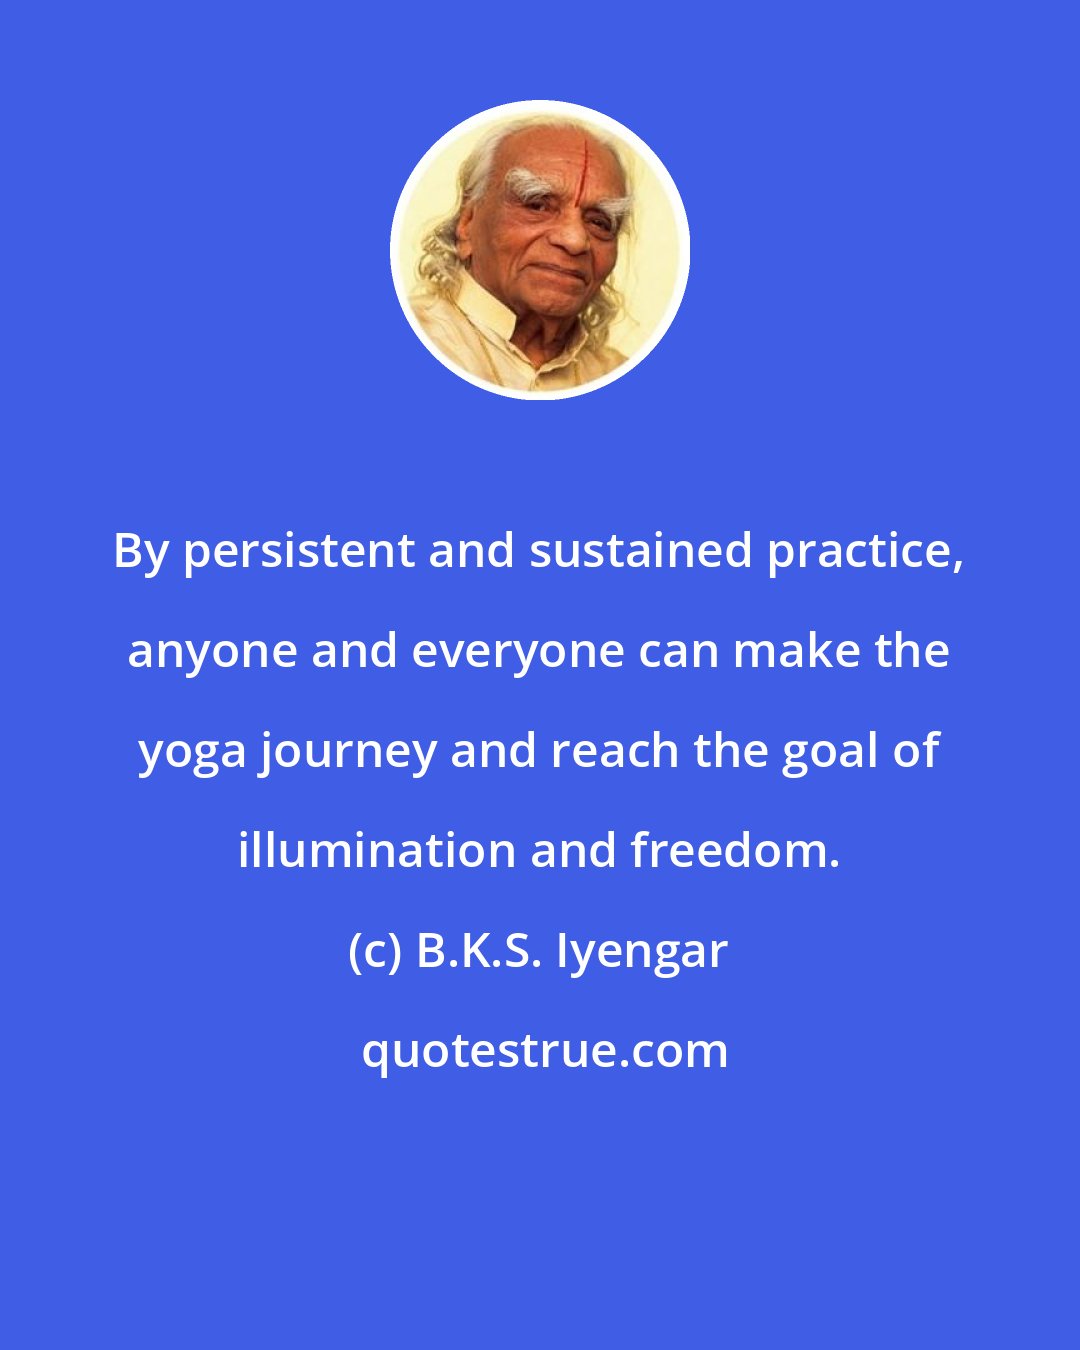 B.K.S. Iyengar: By persistent and sustained practice, anyone and everyone can make the yoga journey and reach the goal of illumination and freedom.